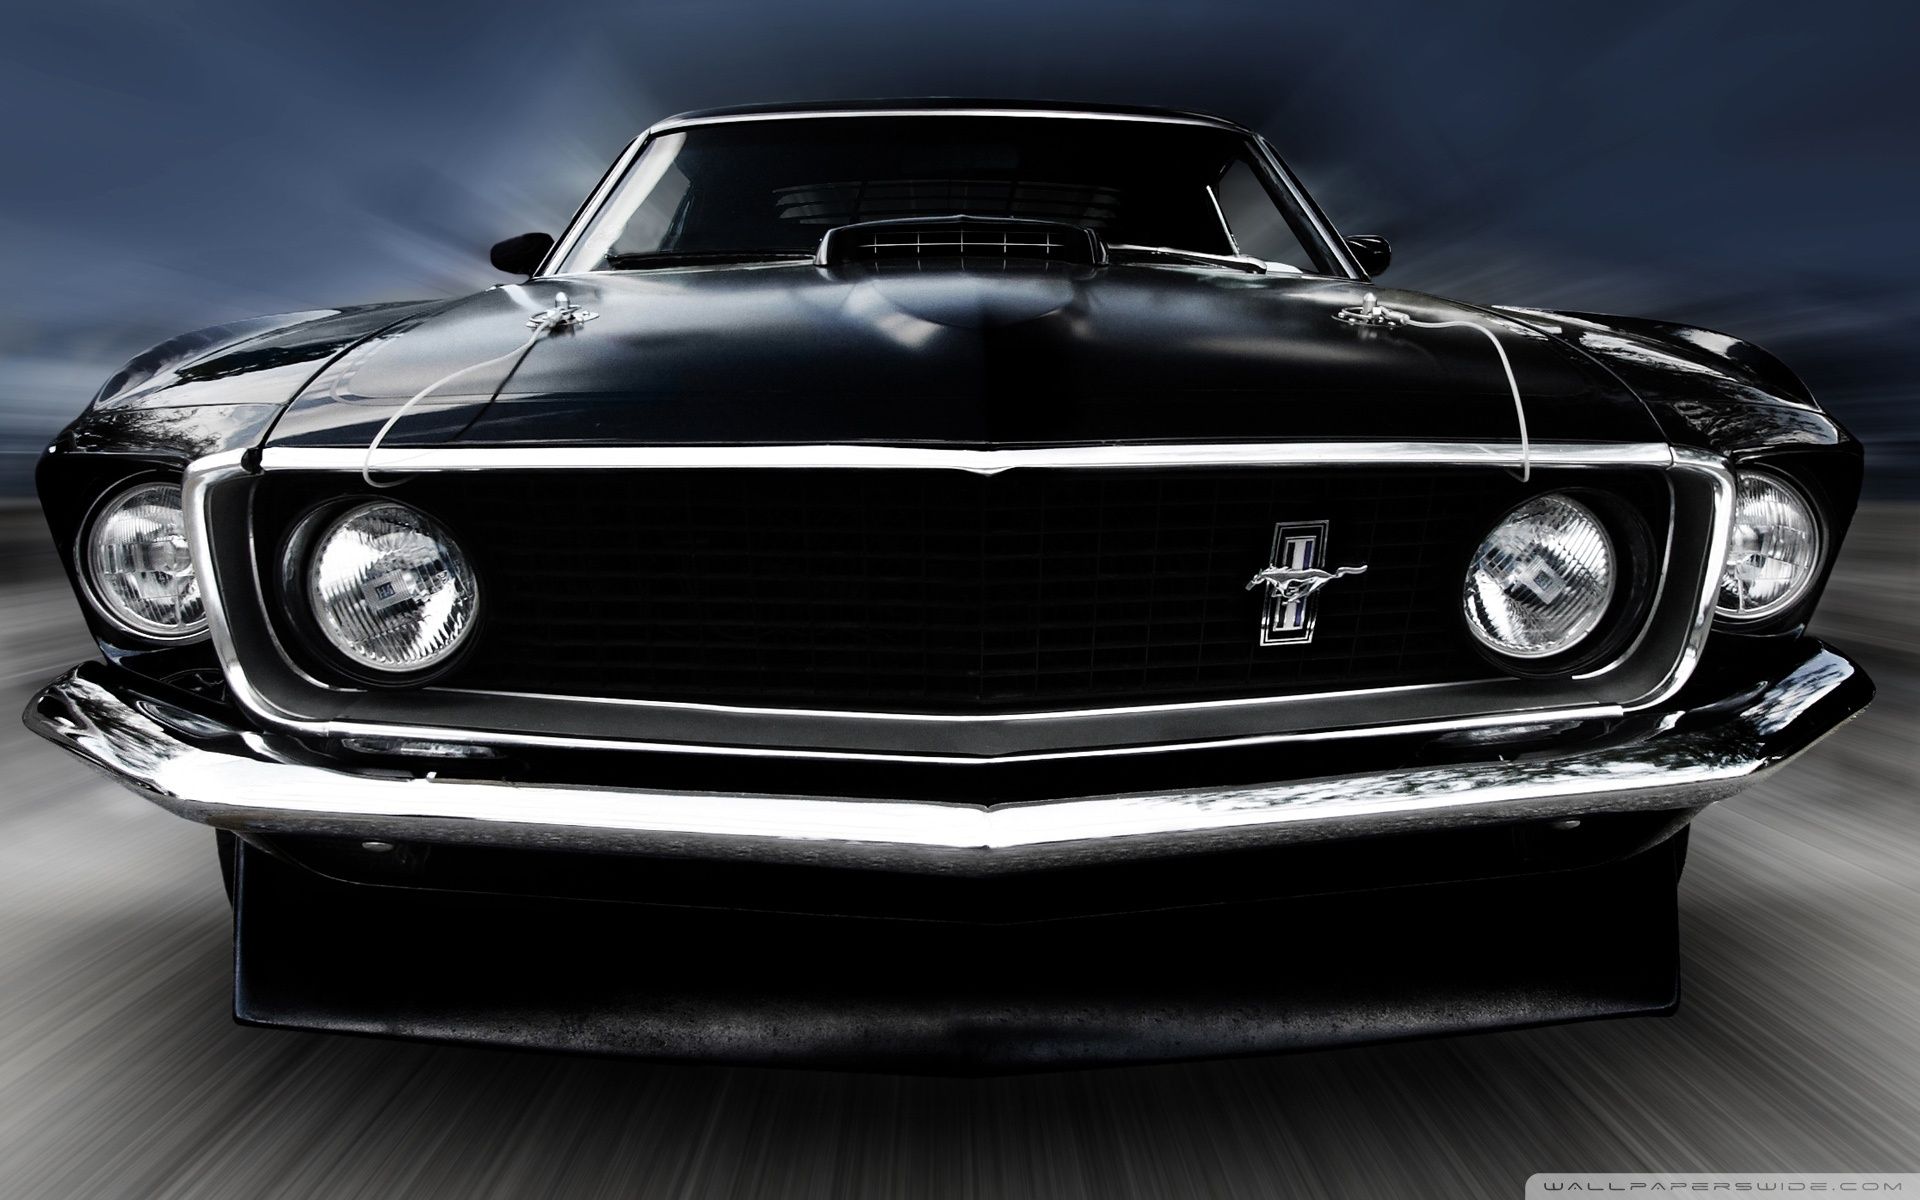 Ford Mustang Wallpapers | Hd Wallpapers